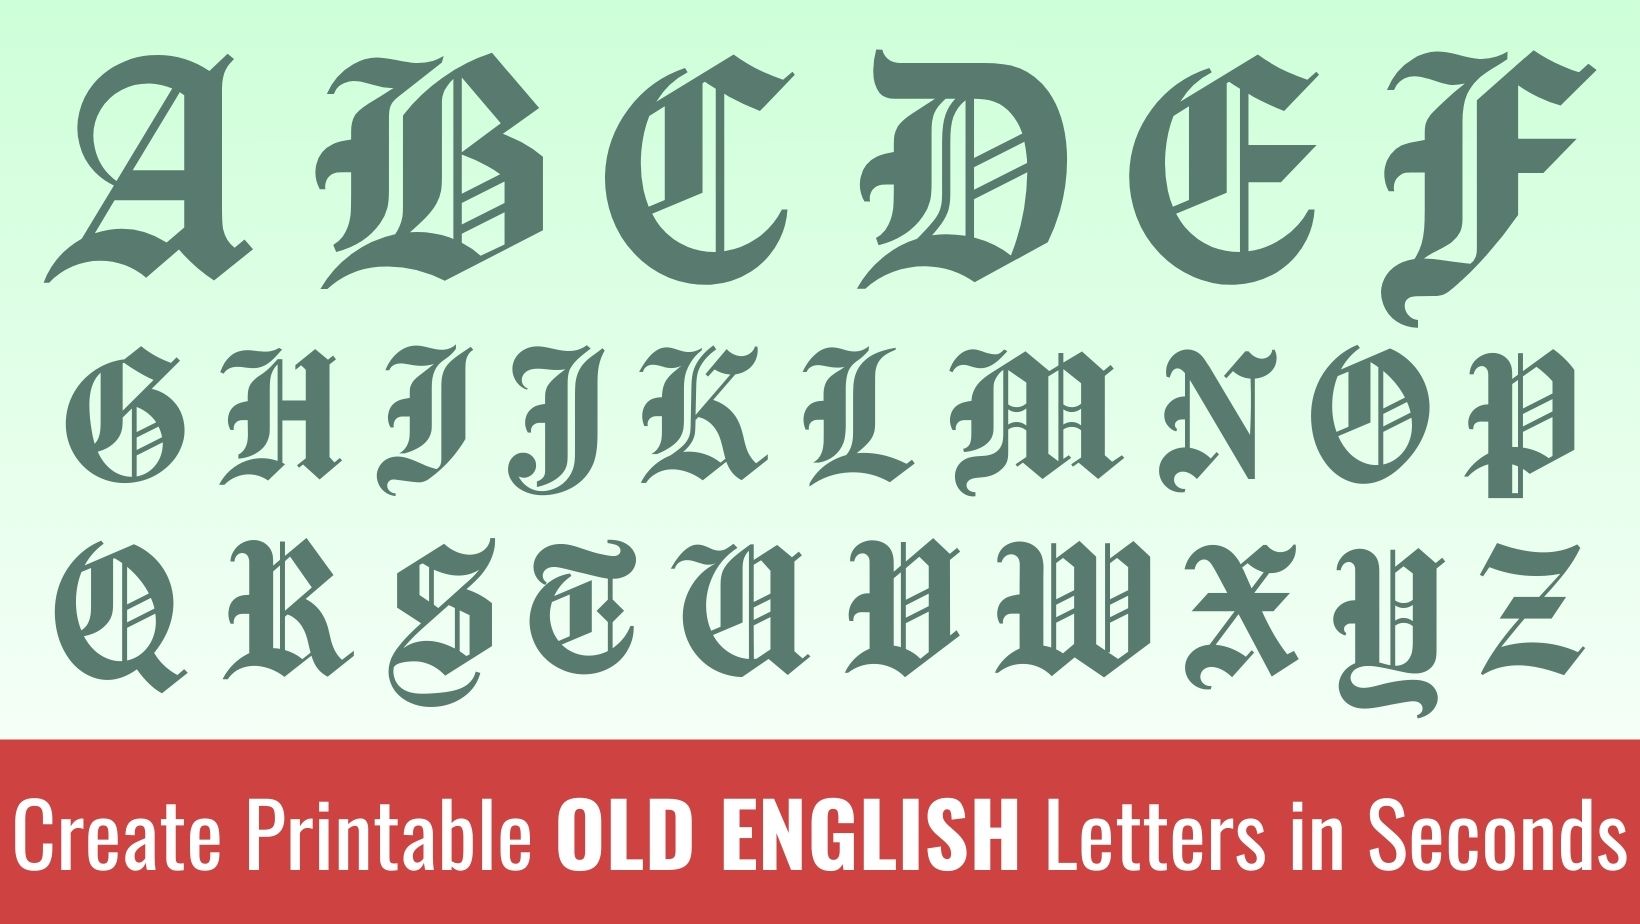 Printable old english Letters: Free Alphabet Font and Letter Templates